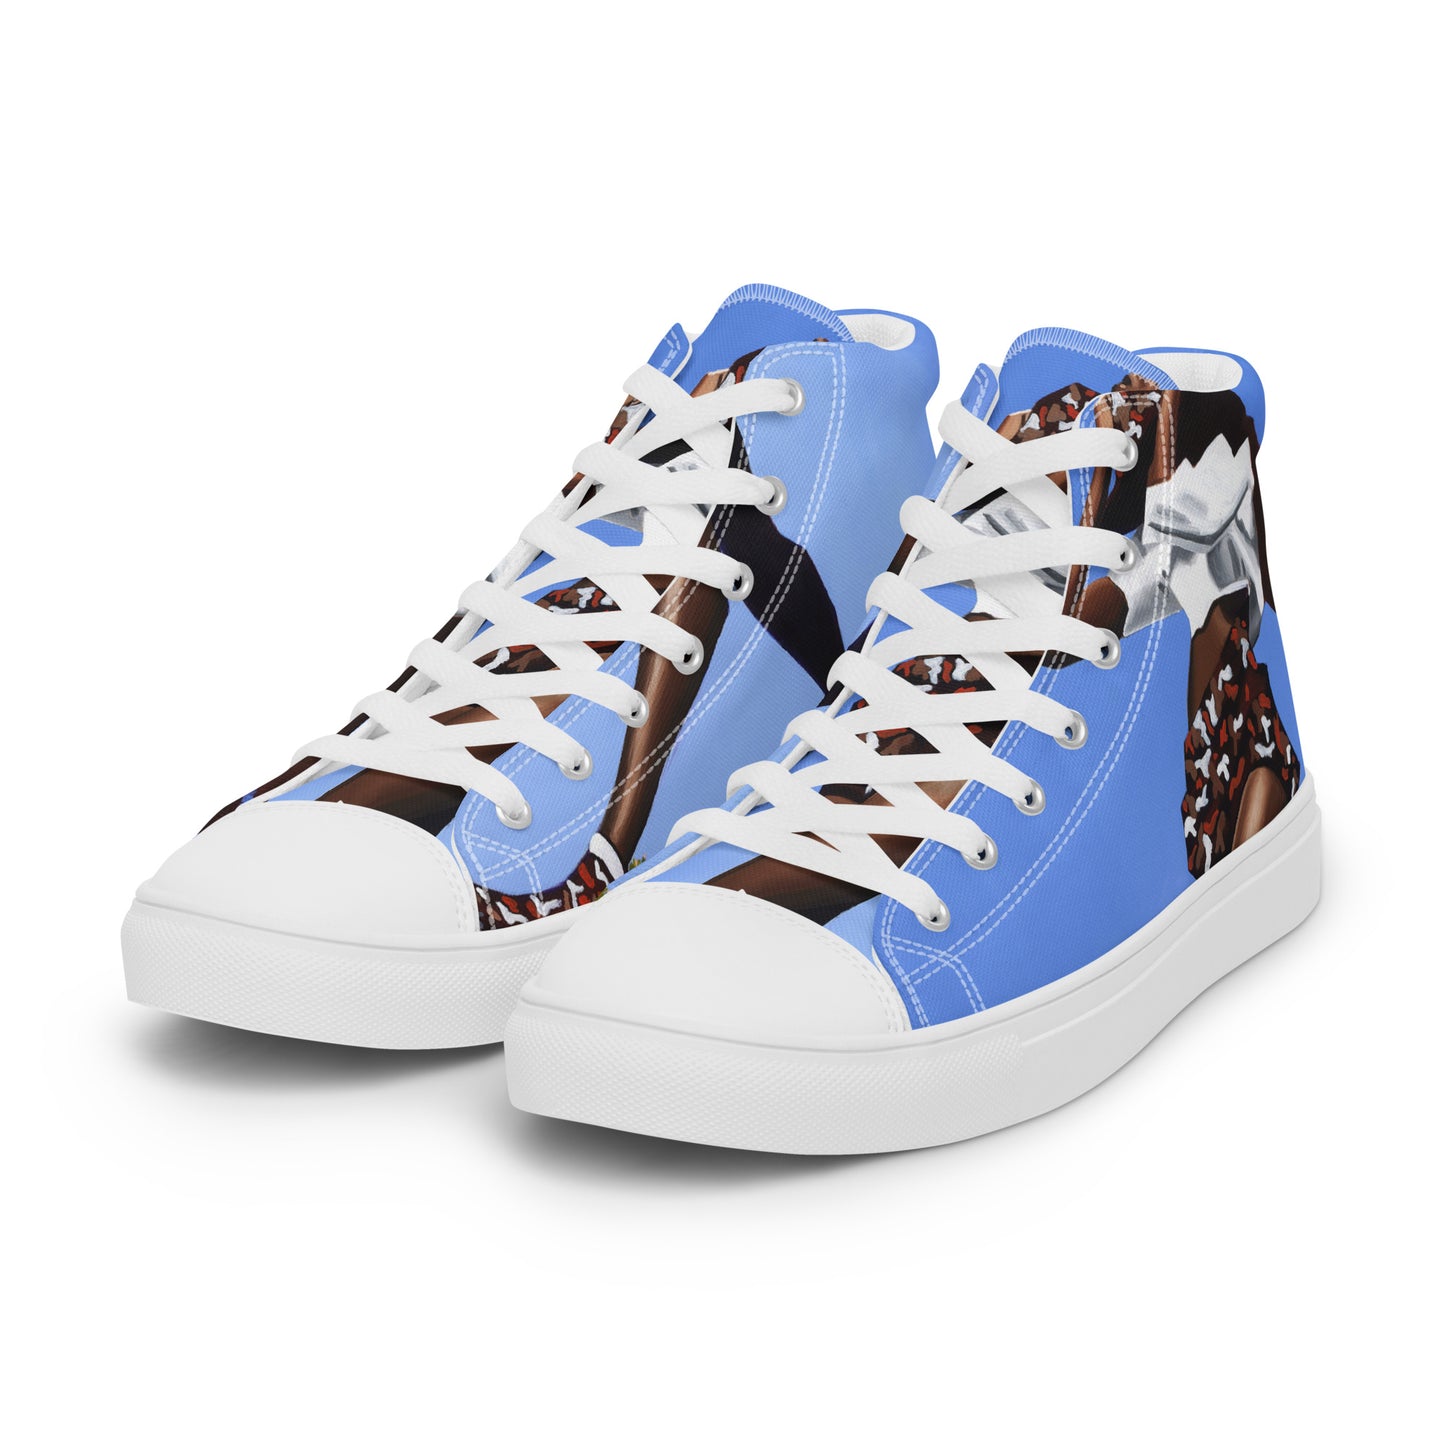 Glide Women’s high top canvas shoes